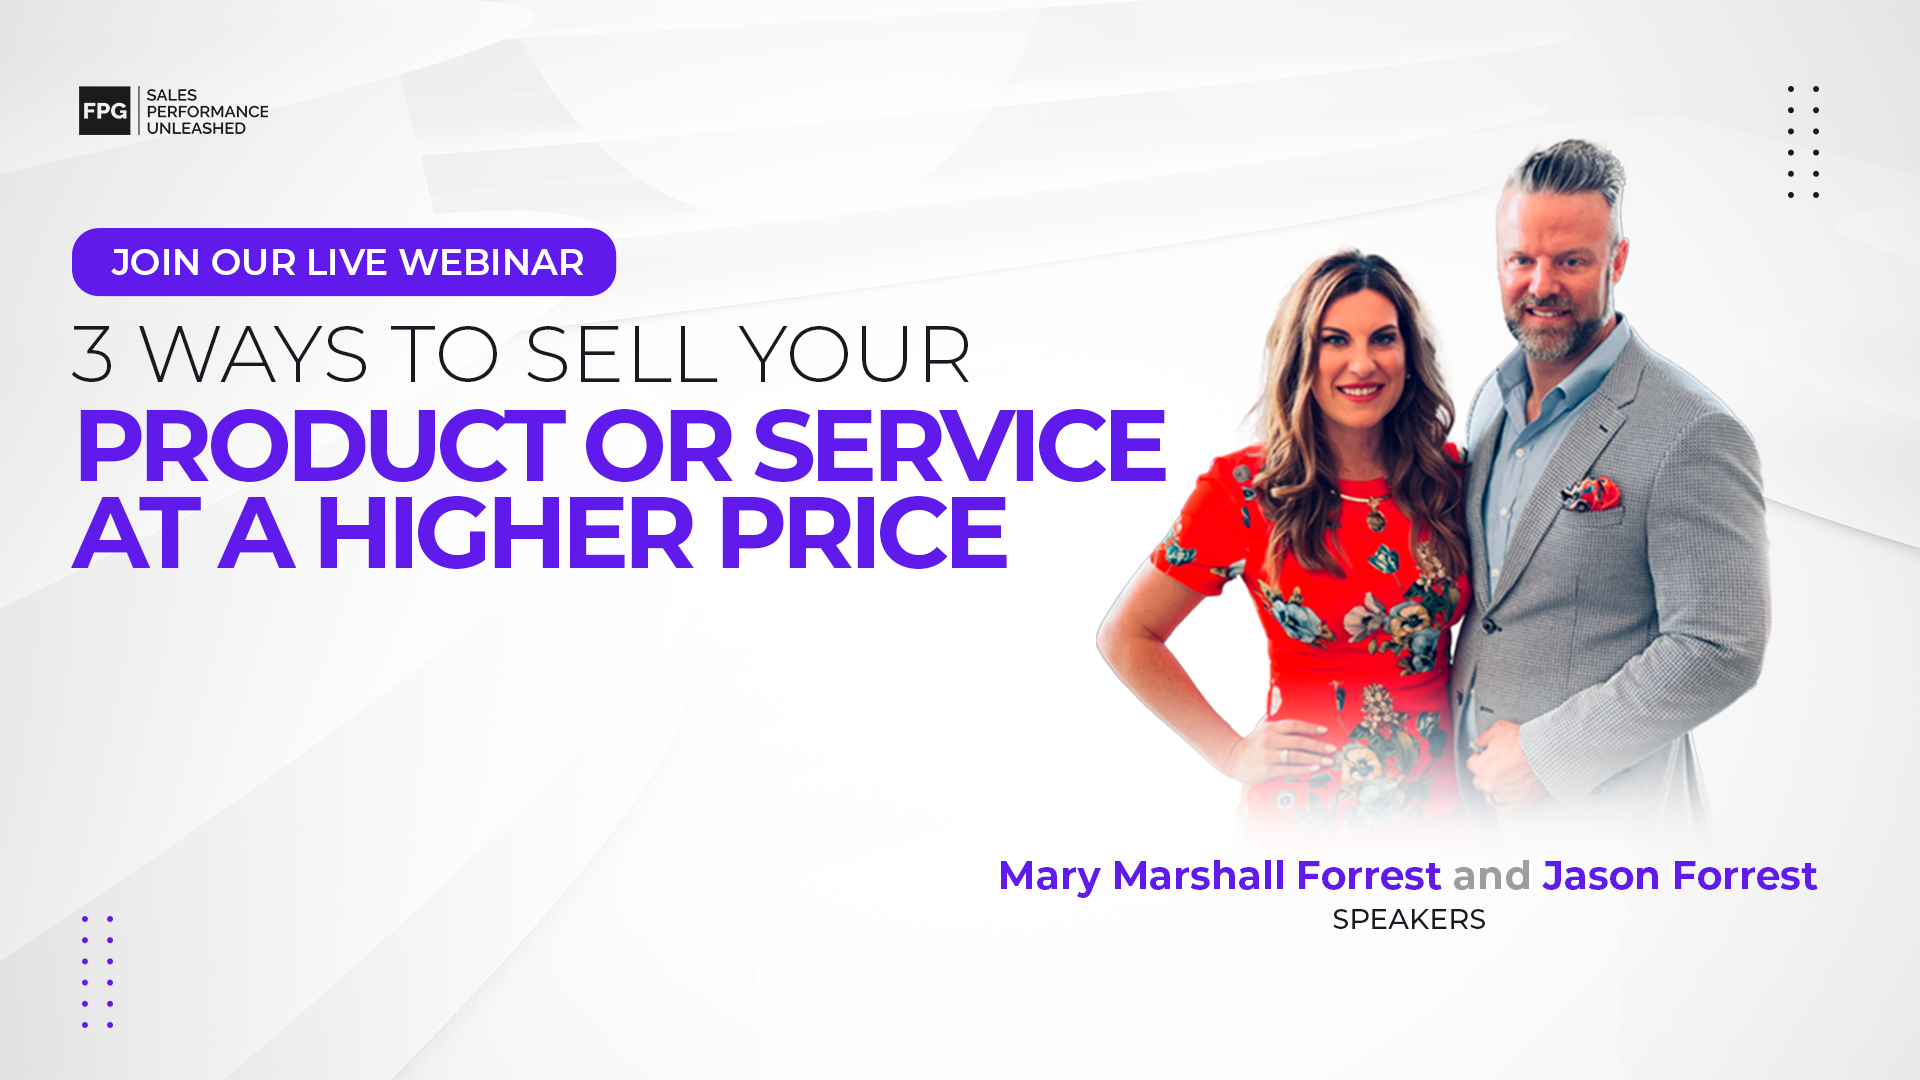 3 Ways to Sell Your Product or Service at a Higher Price